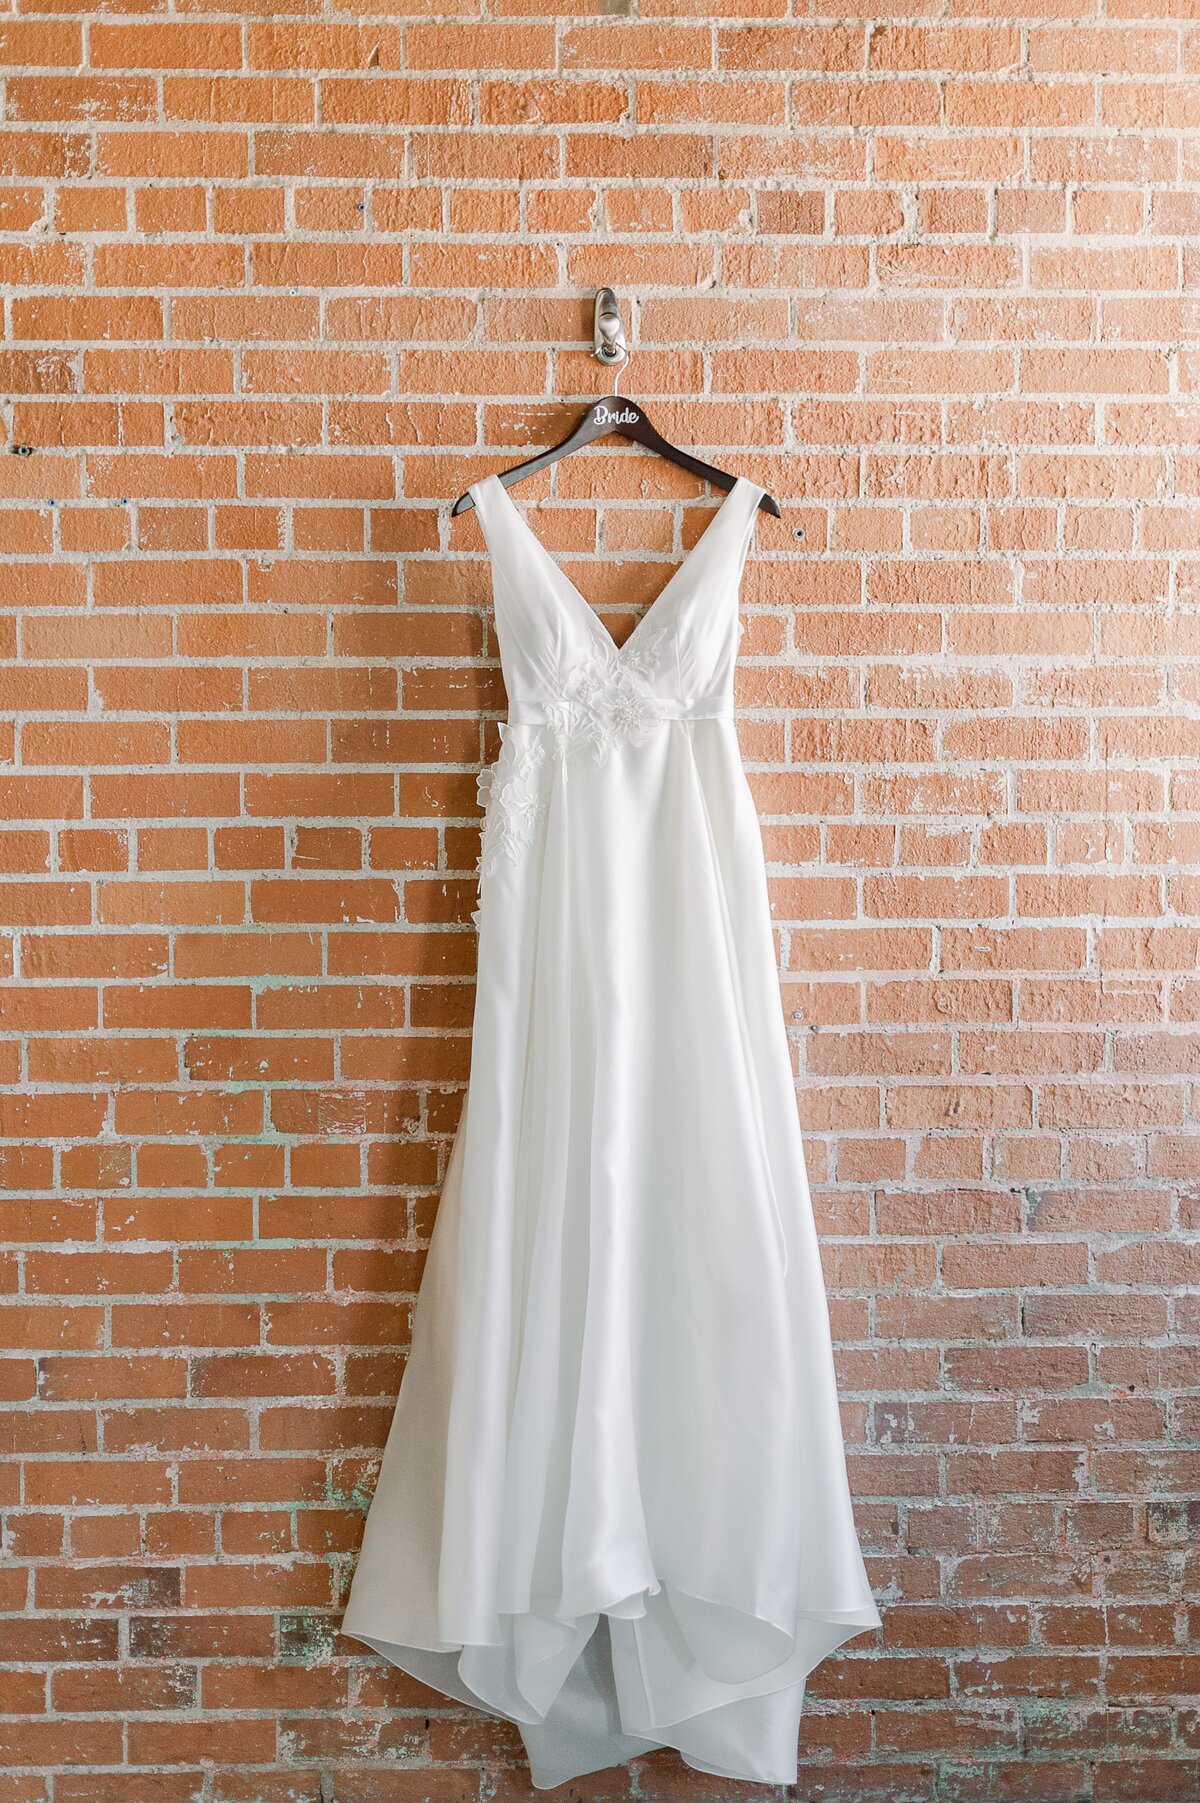 Bride gown on brick wall by phoenix wedding photographer